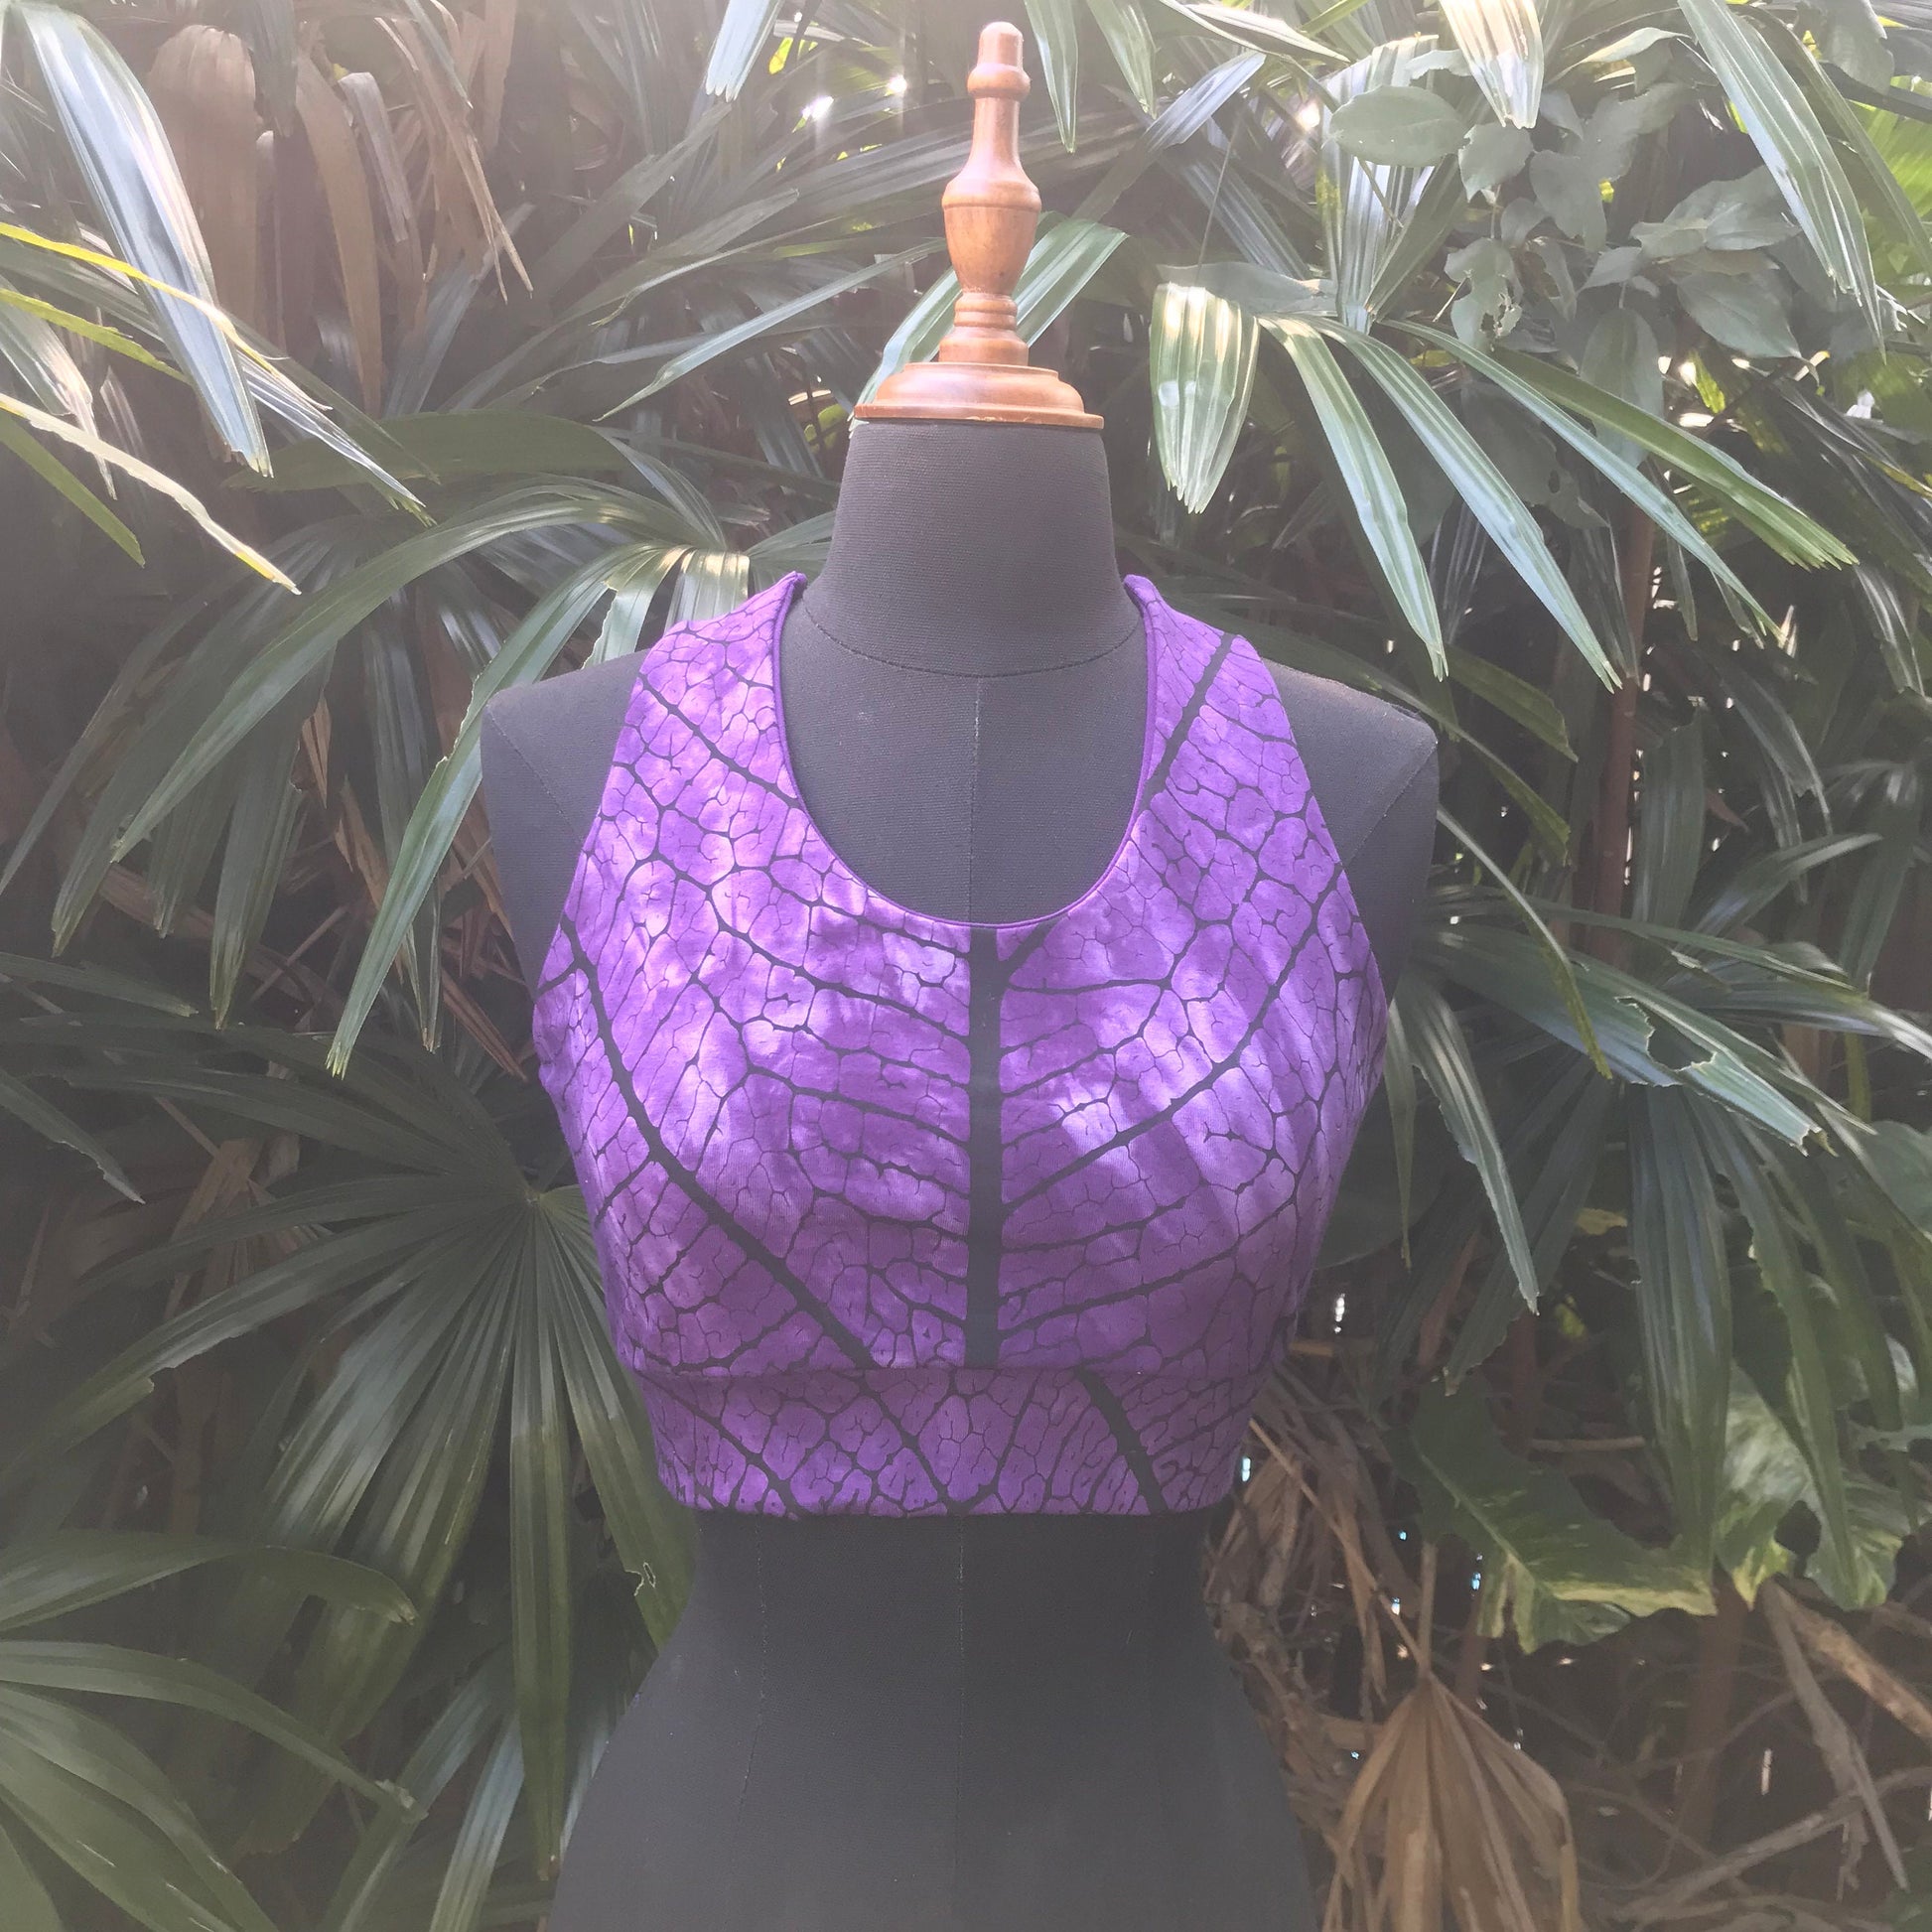 Leaf Crop Top - Yoga Top - Handprinted & Stitched for you by me